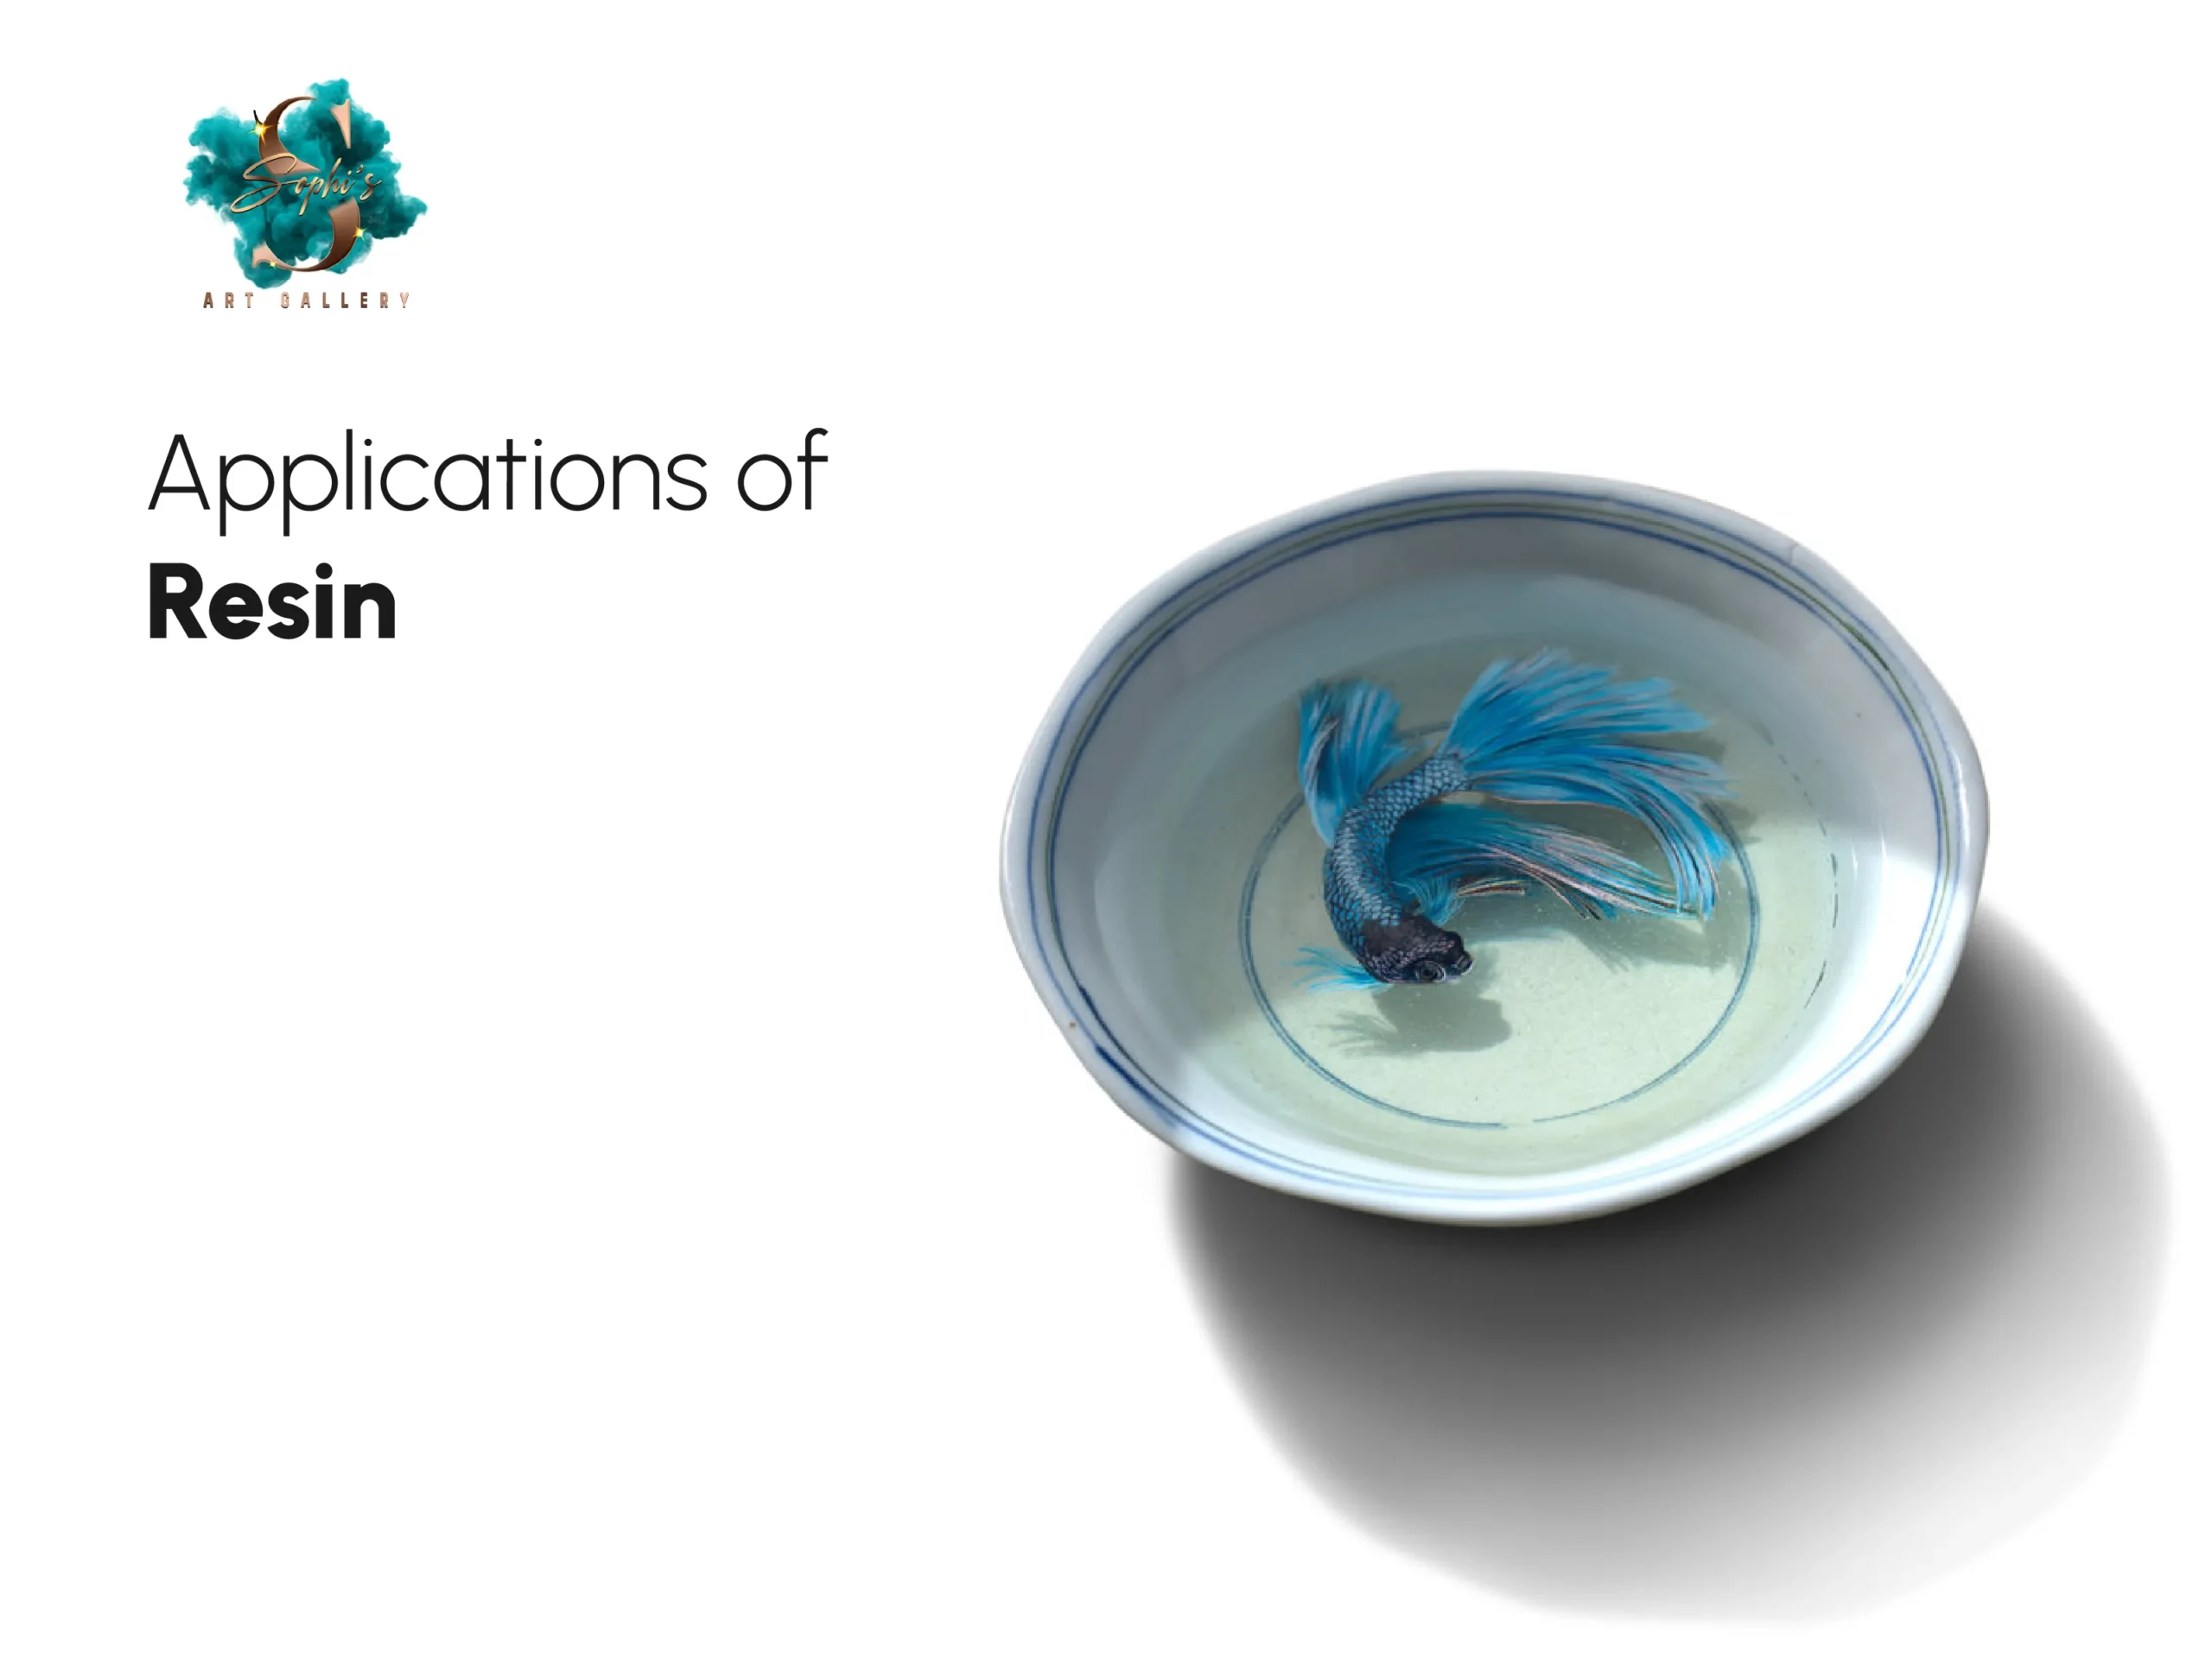 Applications of Resin